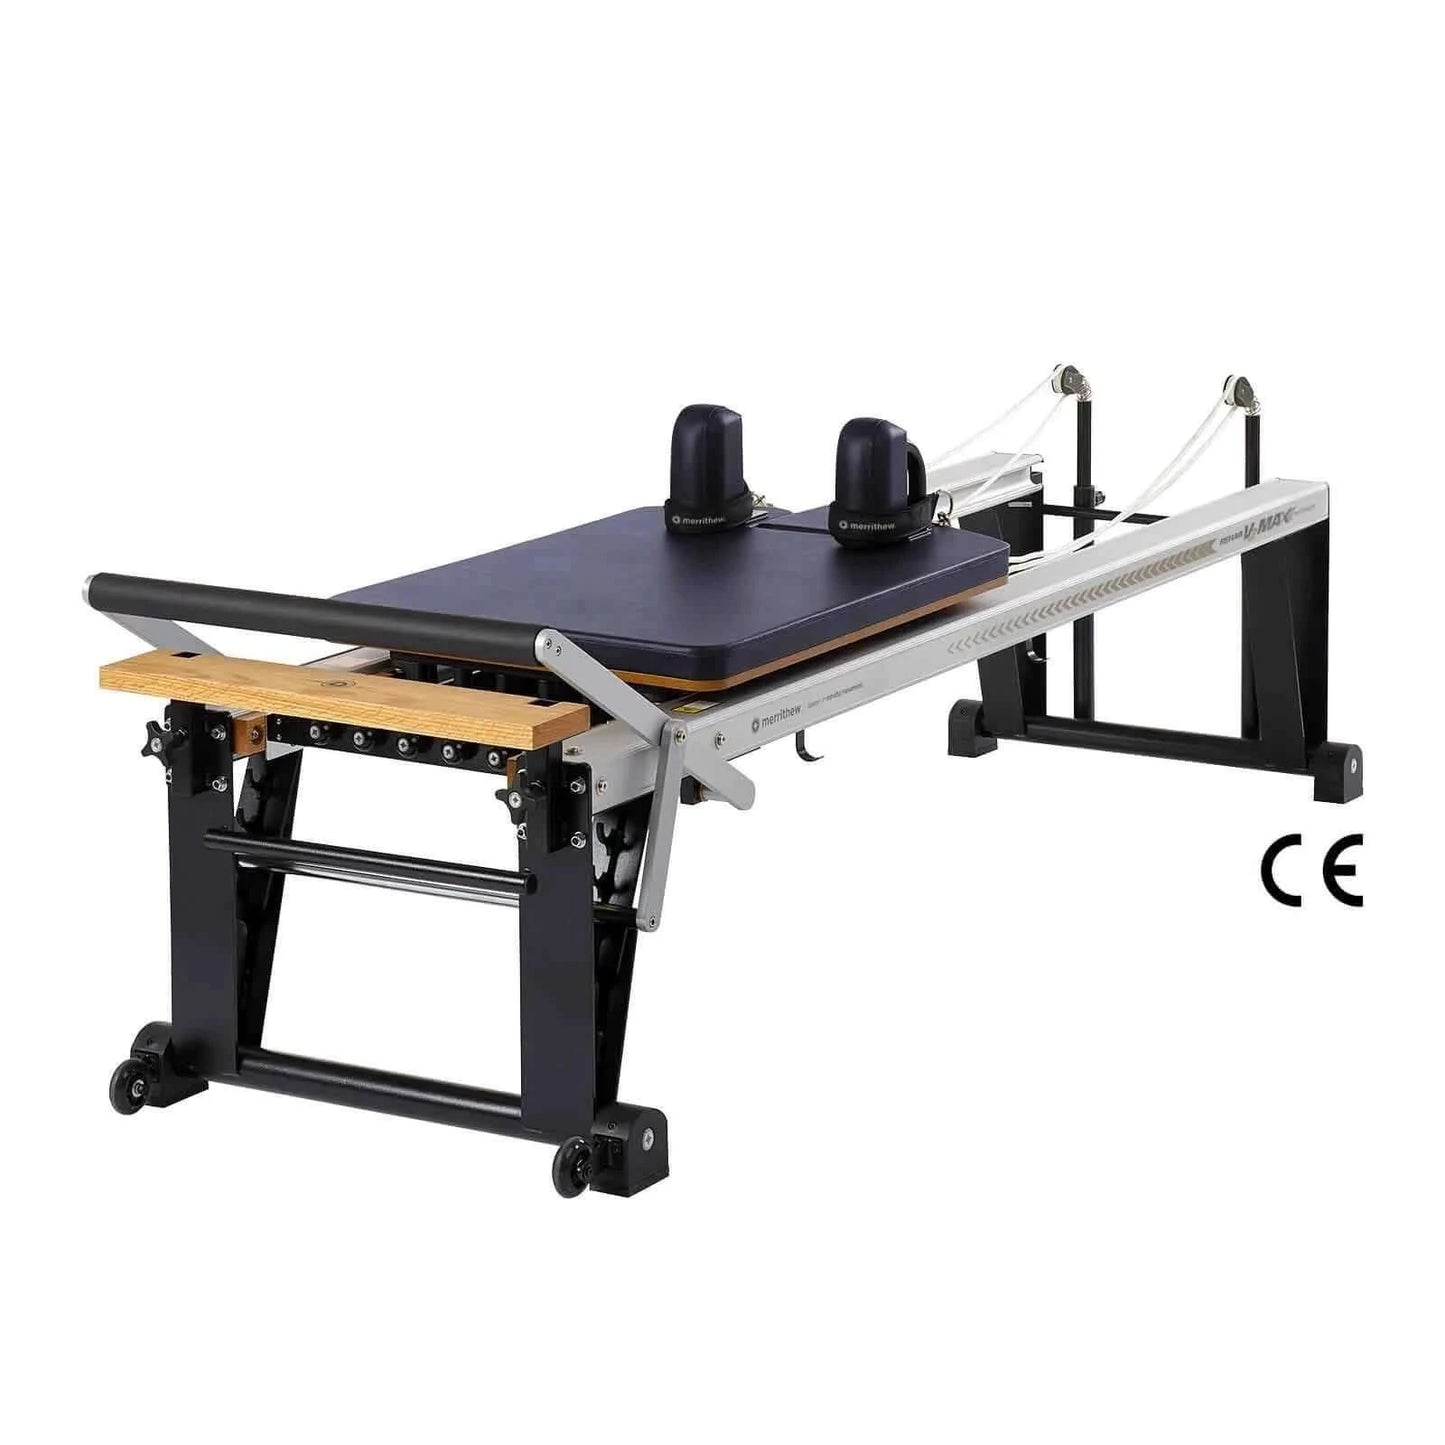 Eclipse Merrithew™ Pilates Rehab V2 Max™ Reformer Machine by Merrithew™ sold by Pilates Matters® by BSP LLC